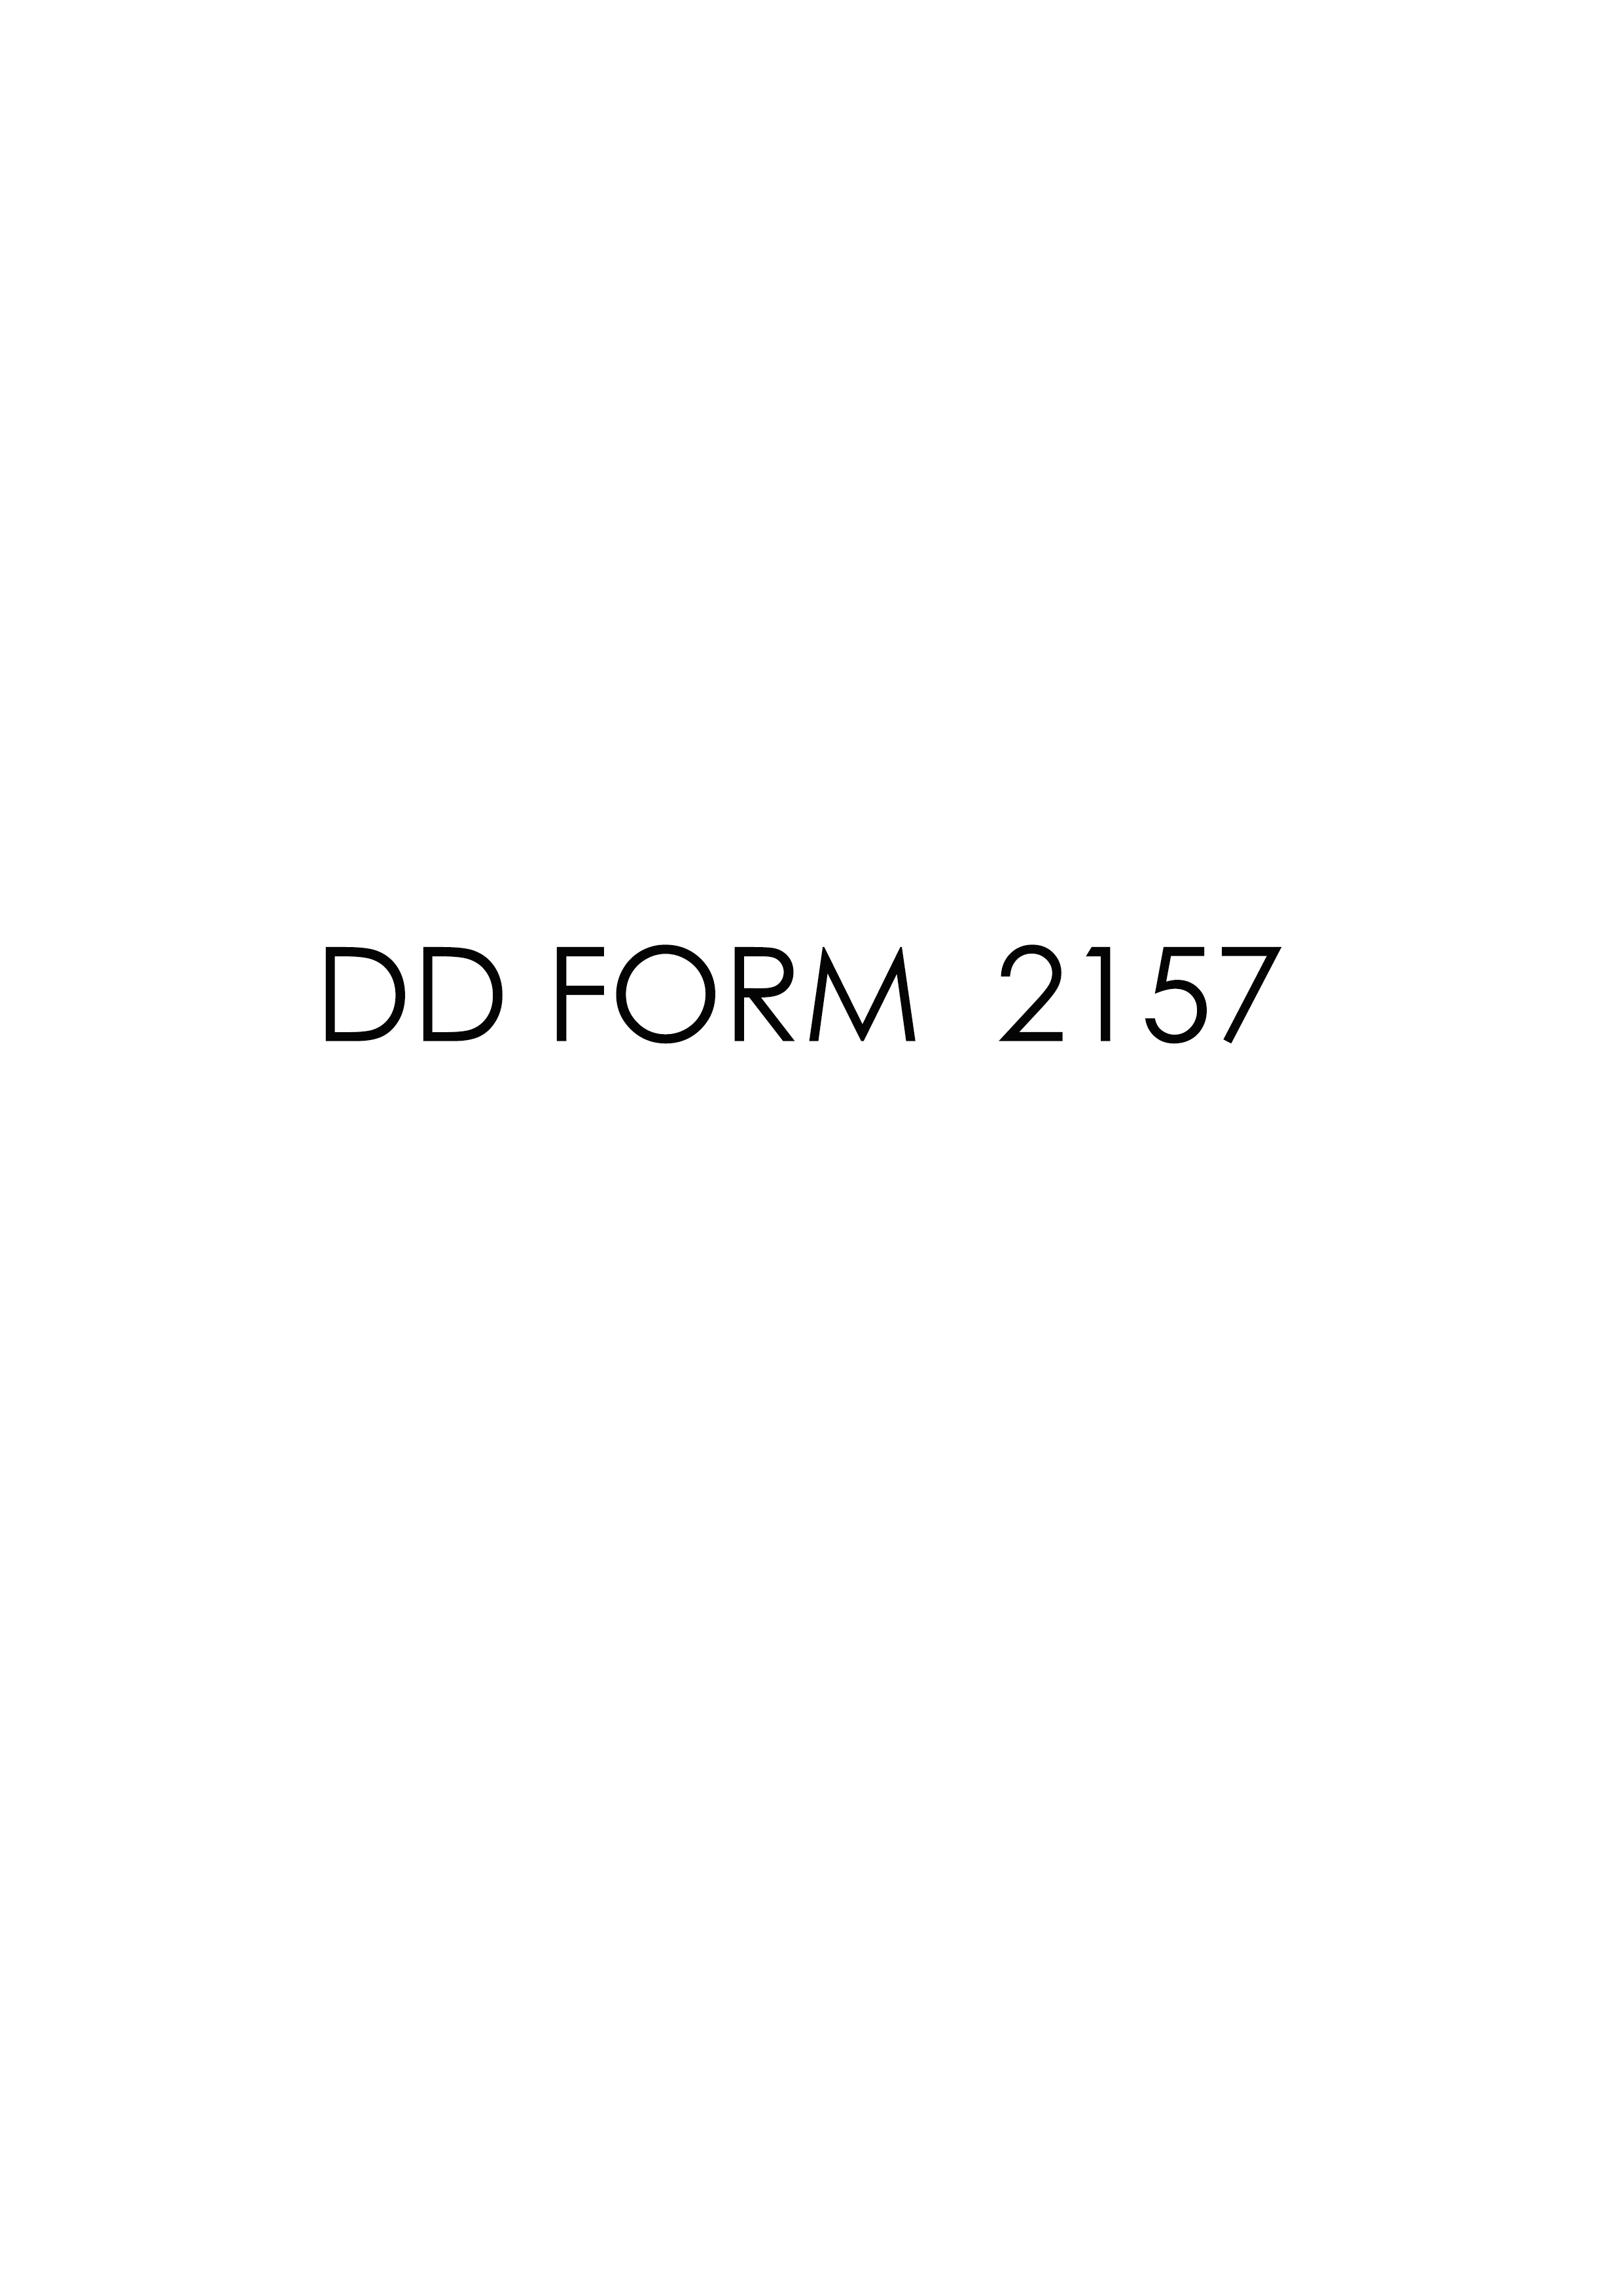 Download Fillable dd Form 2157